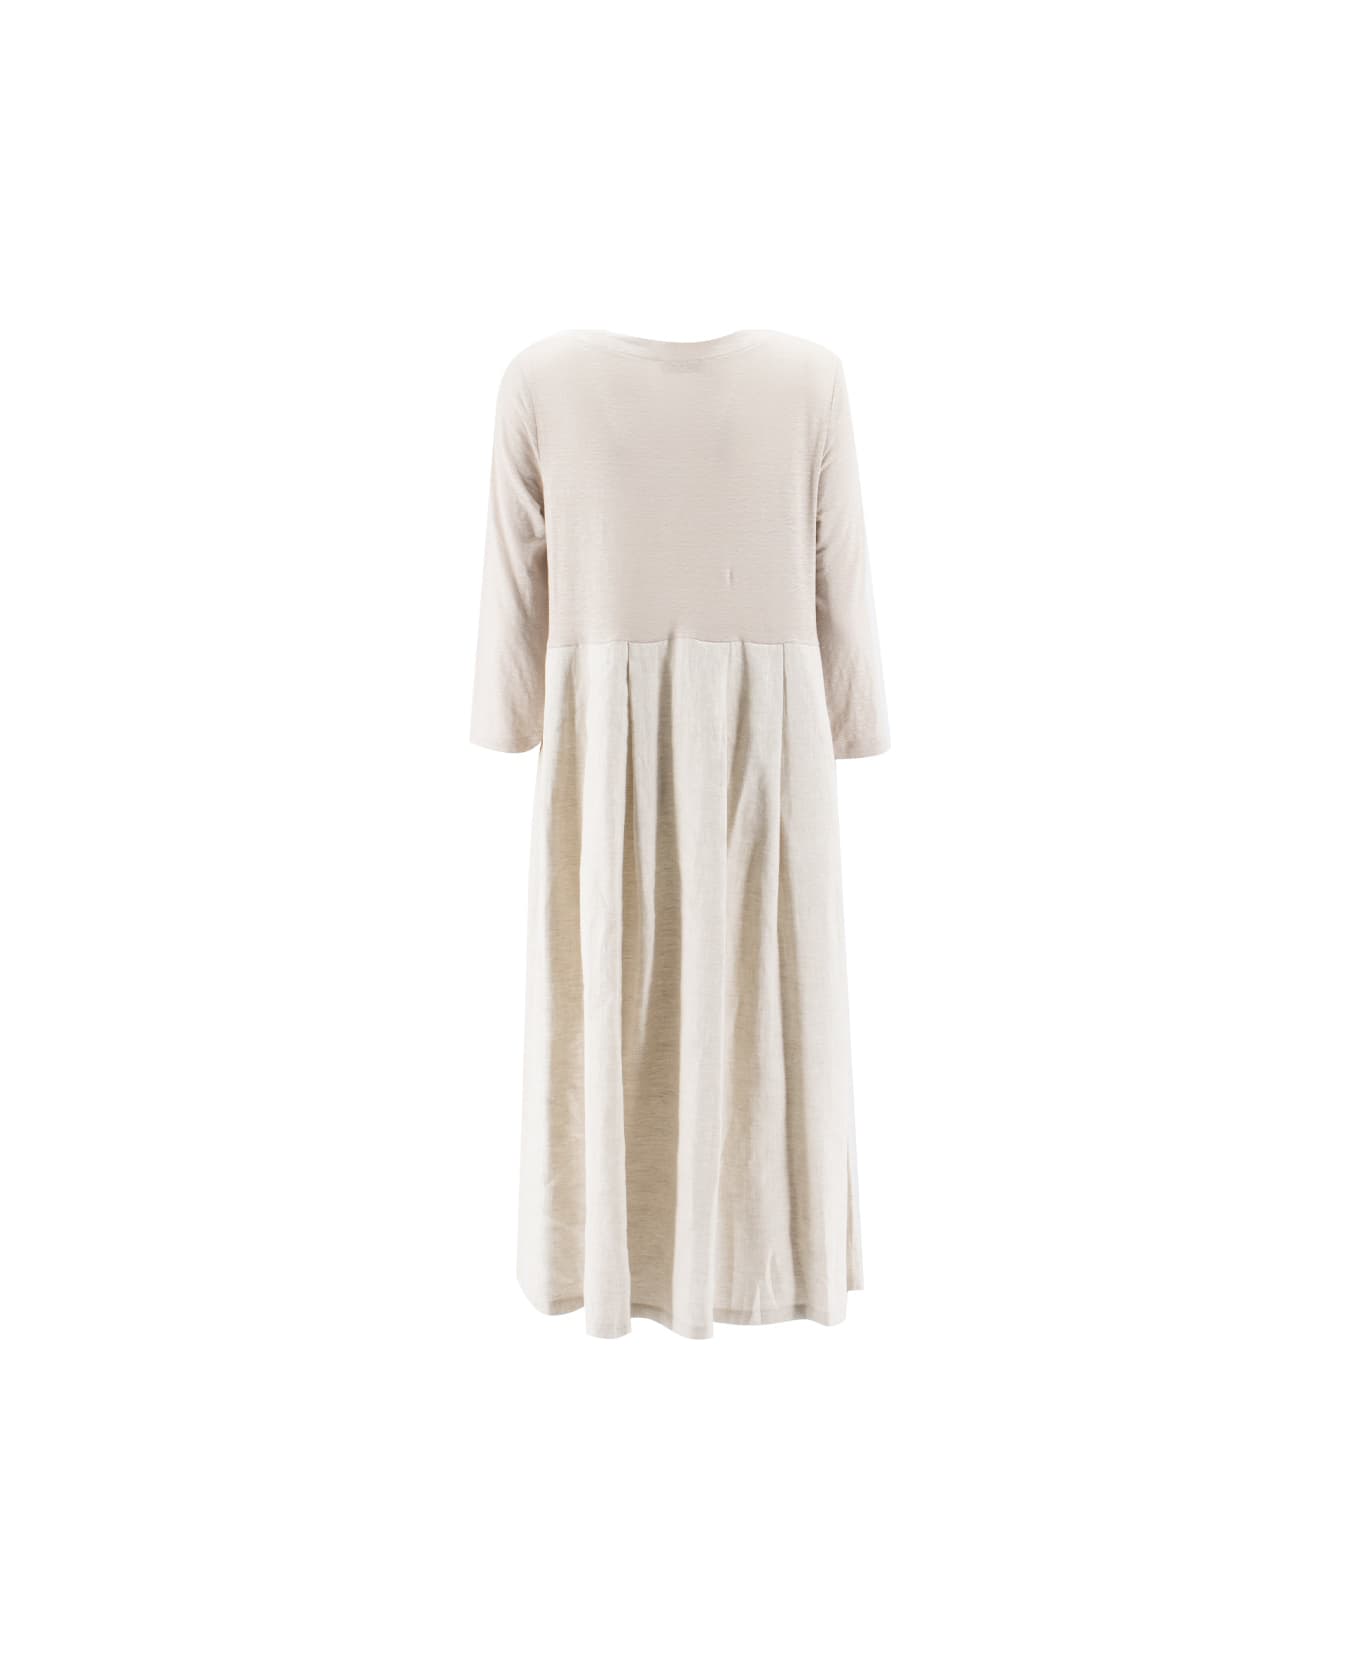 Le Tricot Perugia Dress - LIGHT TAUPE TAUPE ワンピース＆ドレス